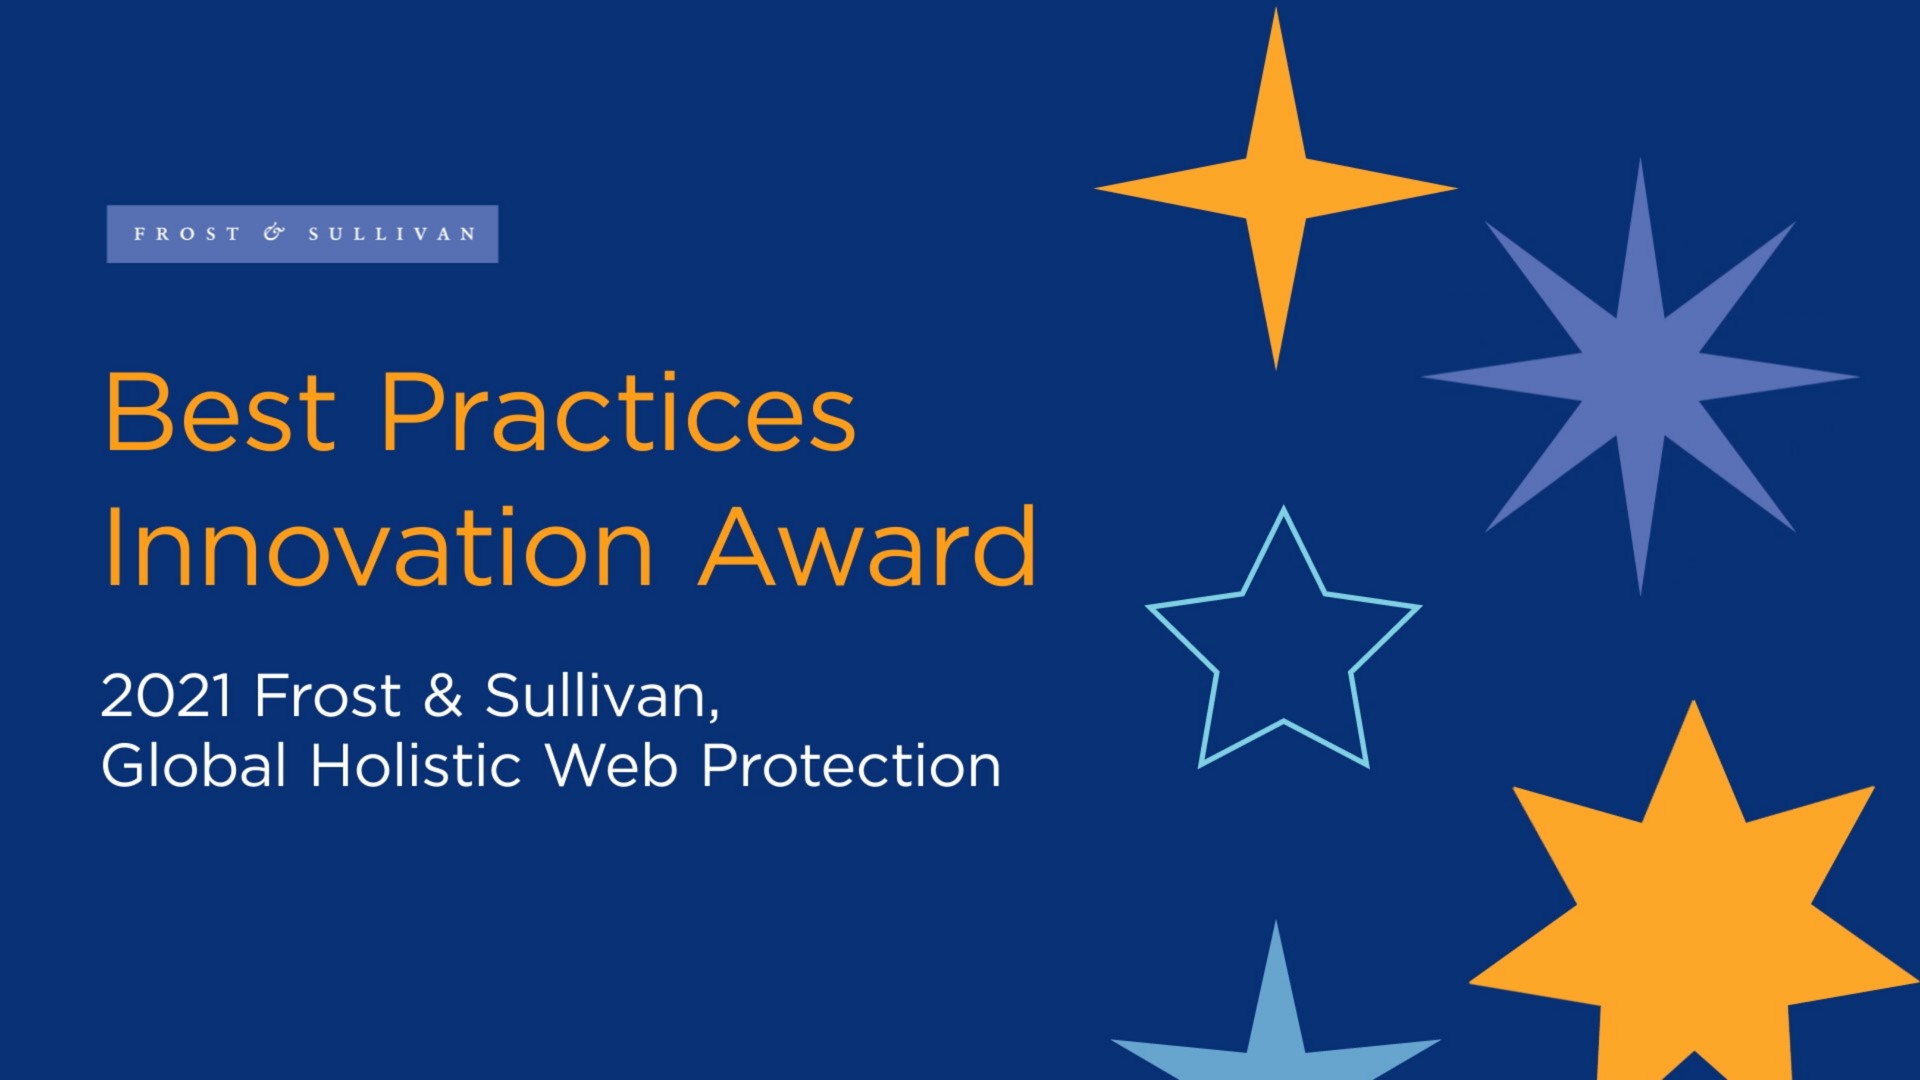 best practices innovation award frost global holistic web protection | Lumen